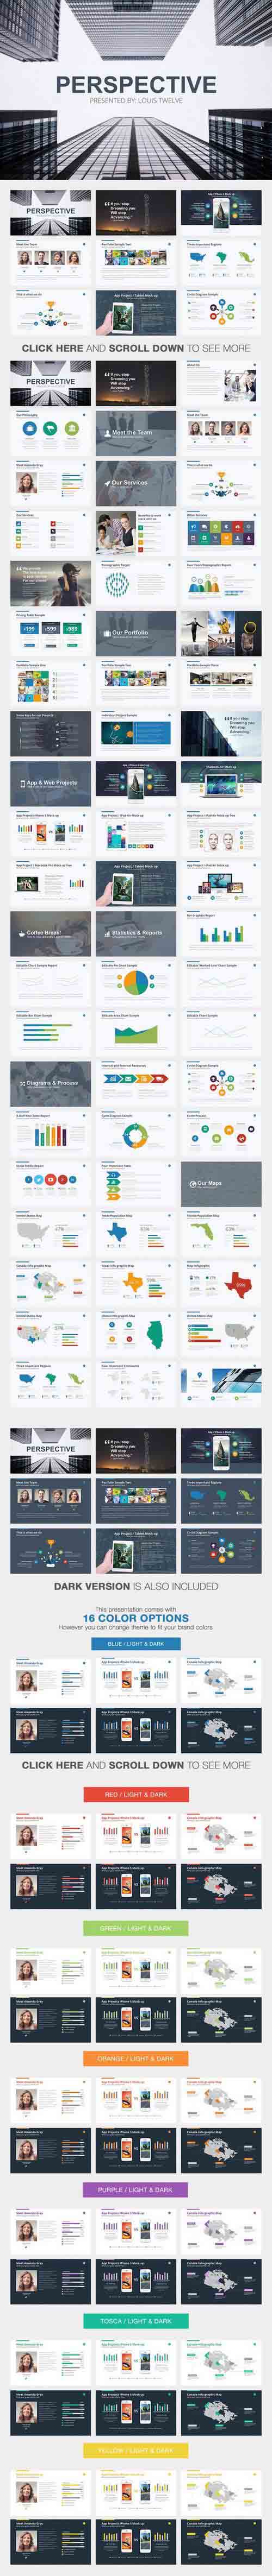 Perspective | Powerpoint Template